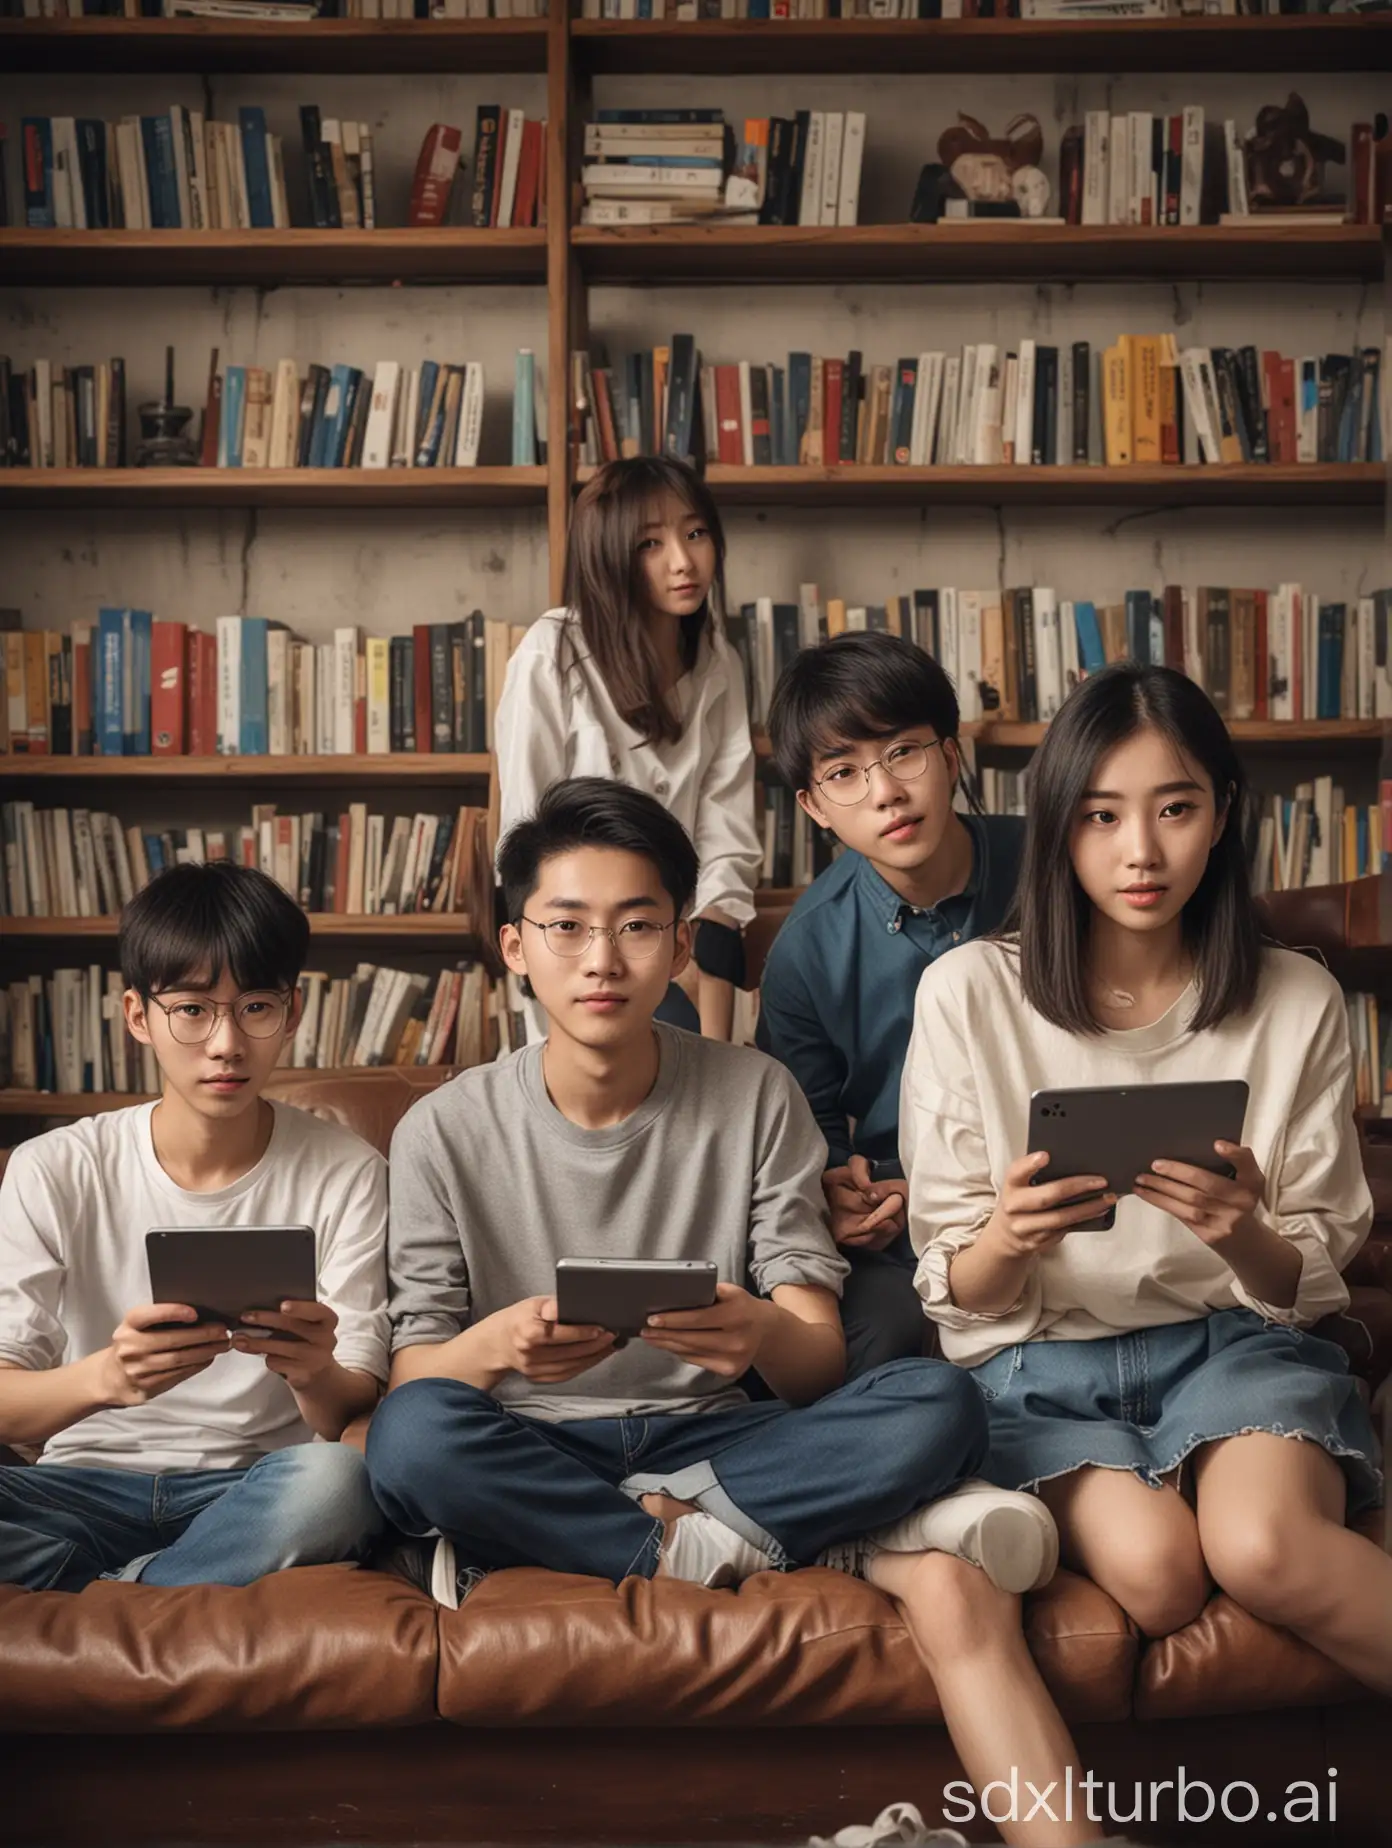 four young men and women from China full of youth and bookworm atmosphere, holding various high-tech electronic devices